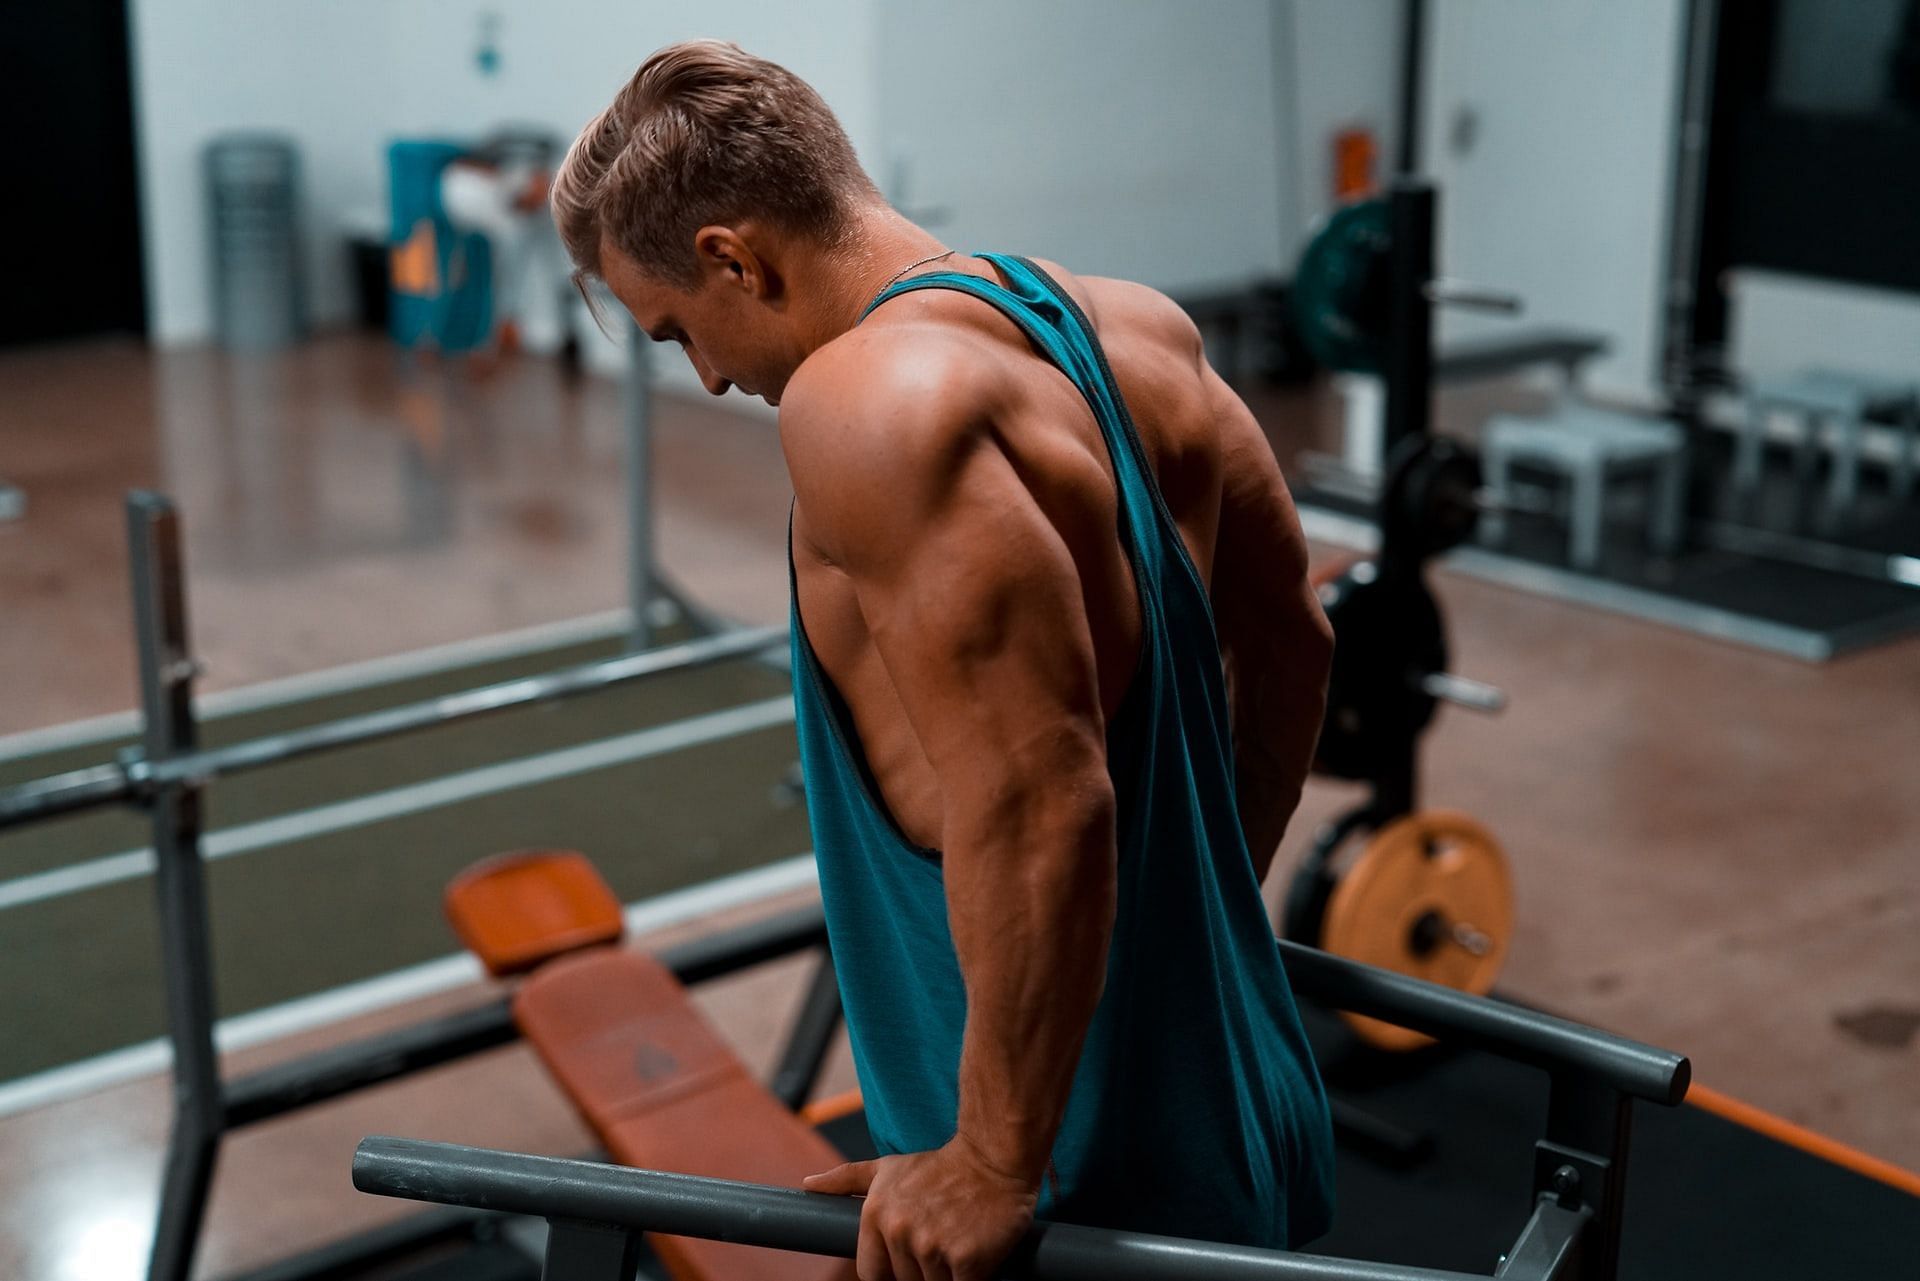 Guide to best tricep exercises for beginners (Photo by John Fornander on Unsplash)